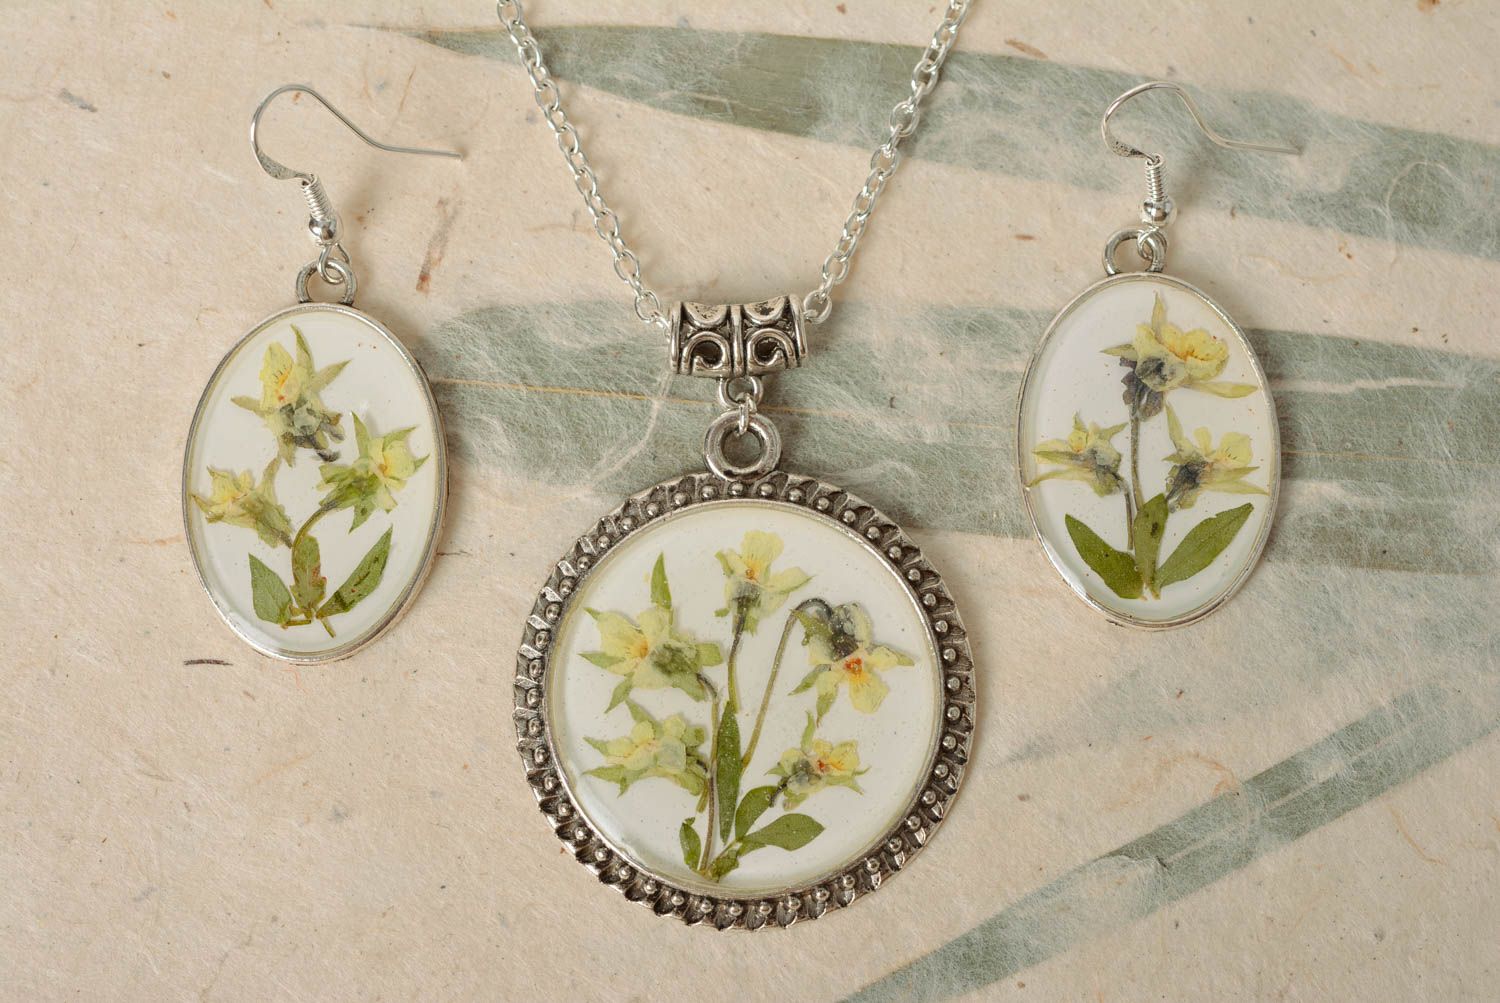 Handmade metal floral epoxy resin jewelry set 2 items necklace and earrings photo 1